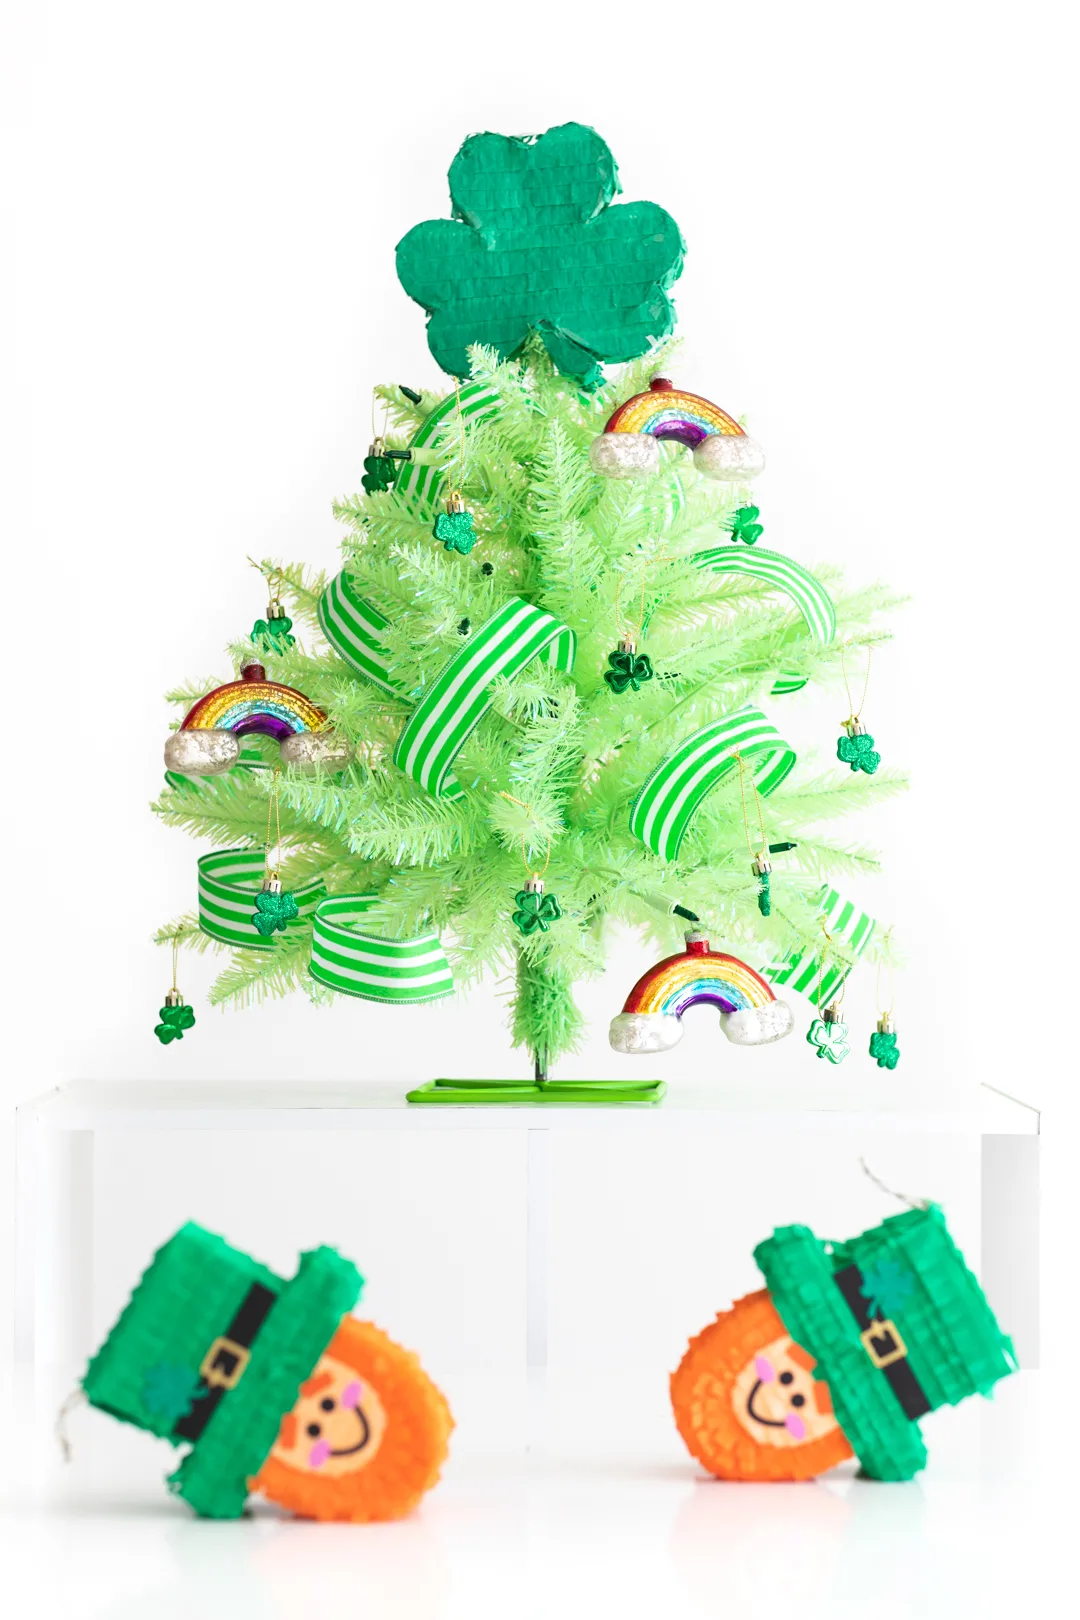 Mini green St. Patrick's Day tree, decorated with mini leprechaun piñatas nearby to decorate for St. Patrick's Day.